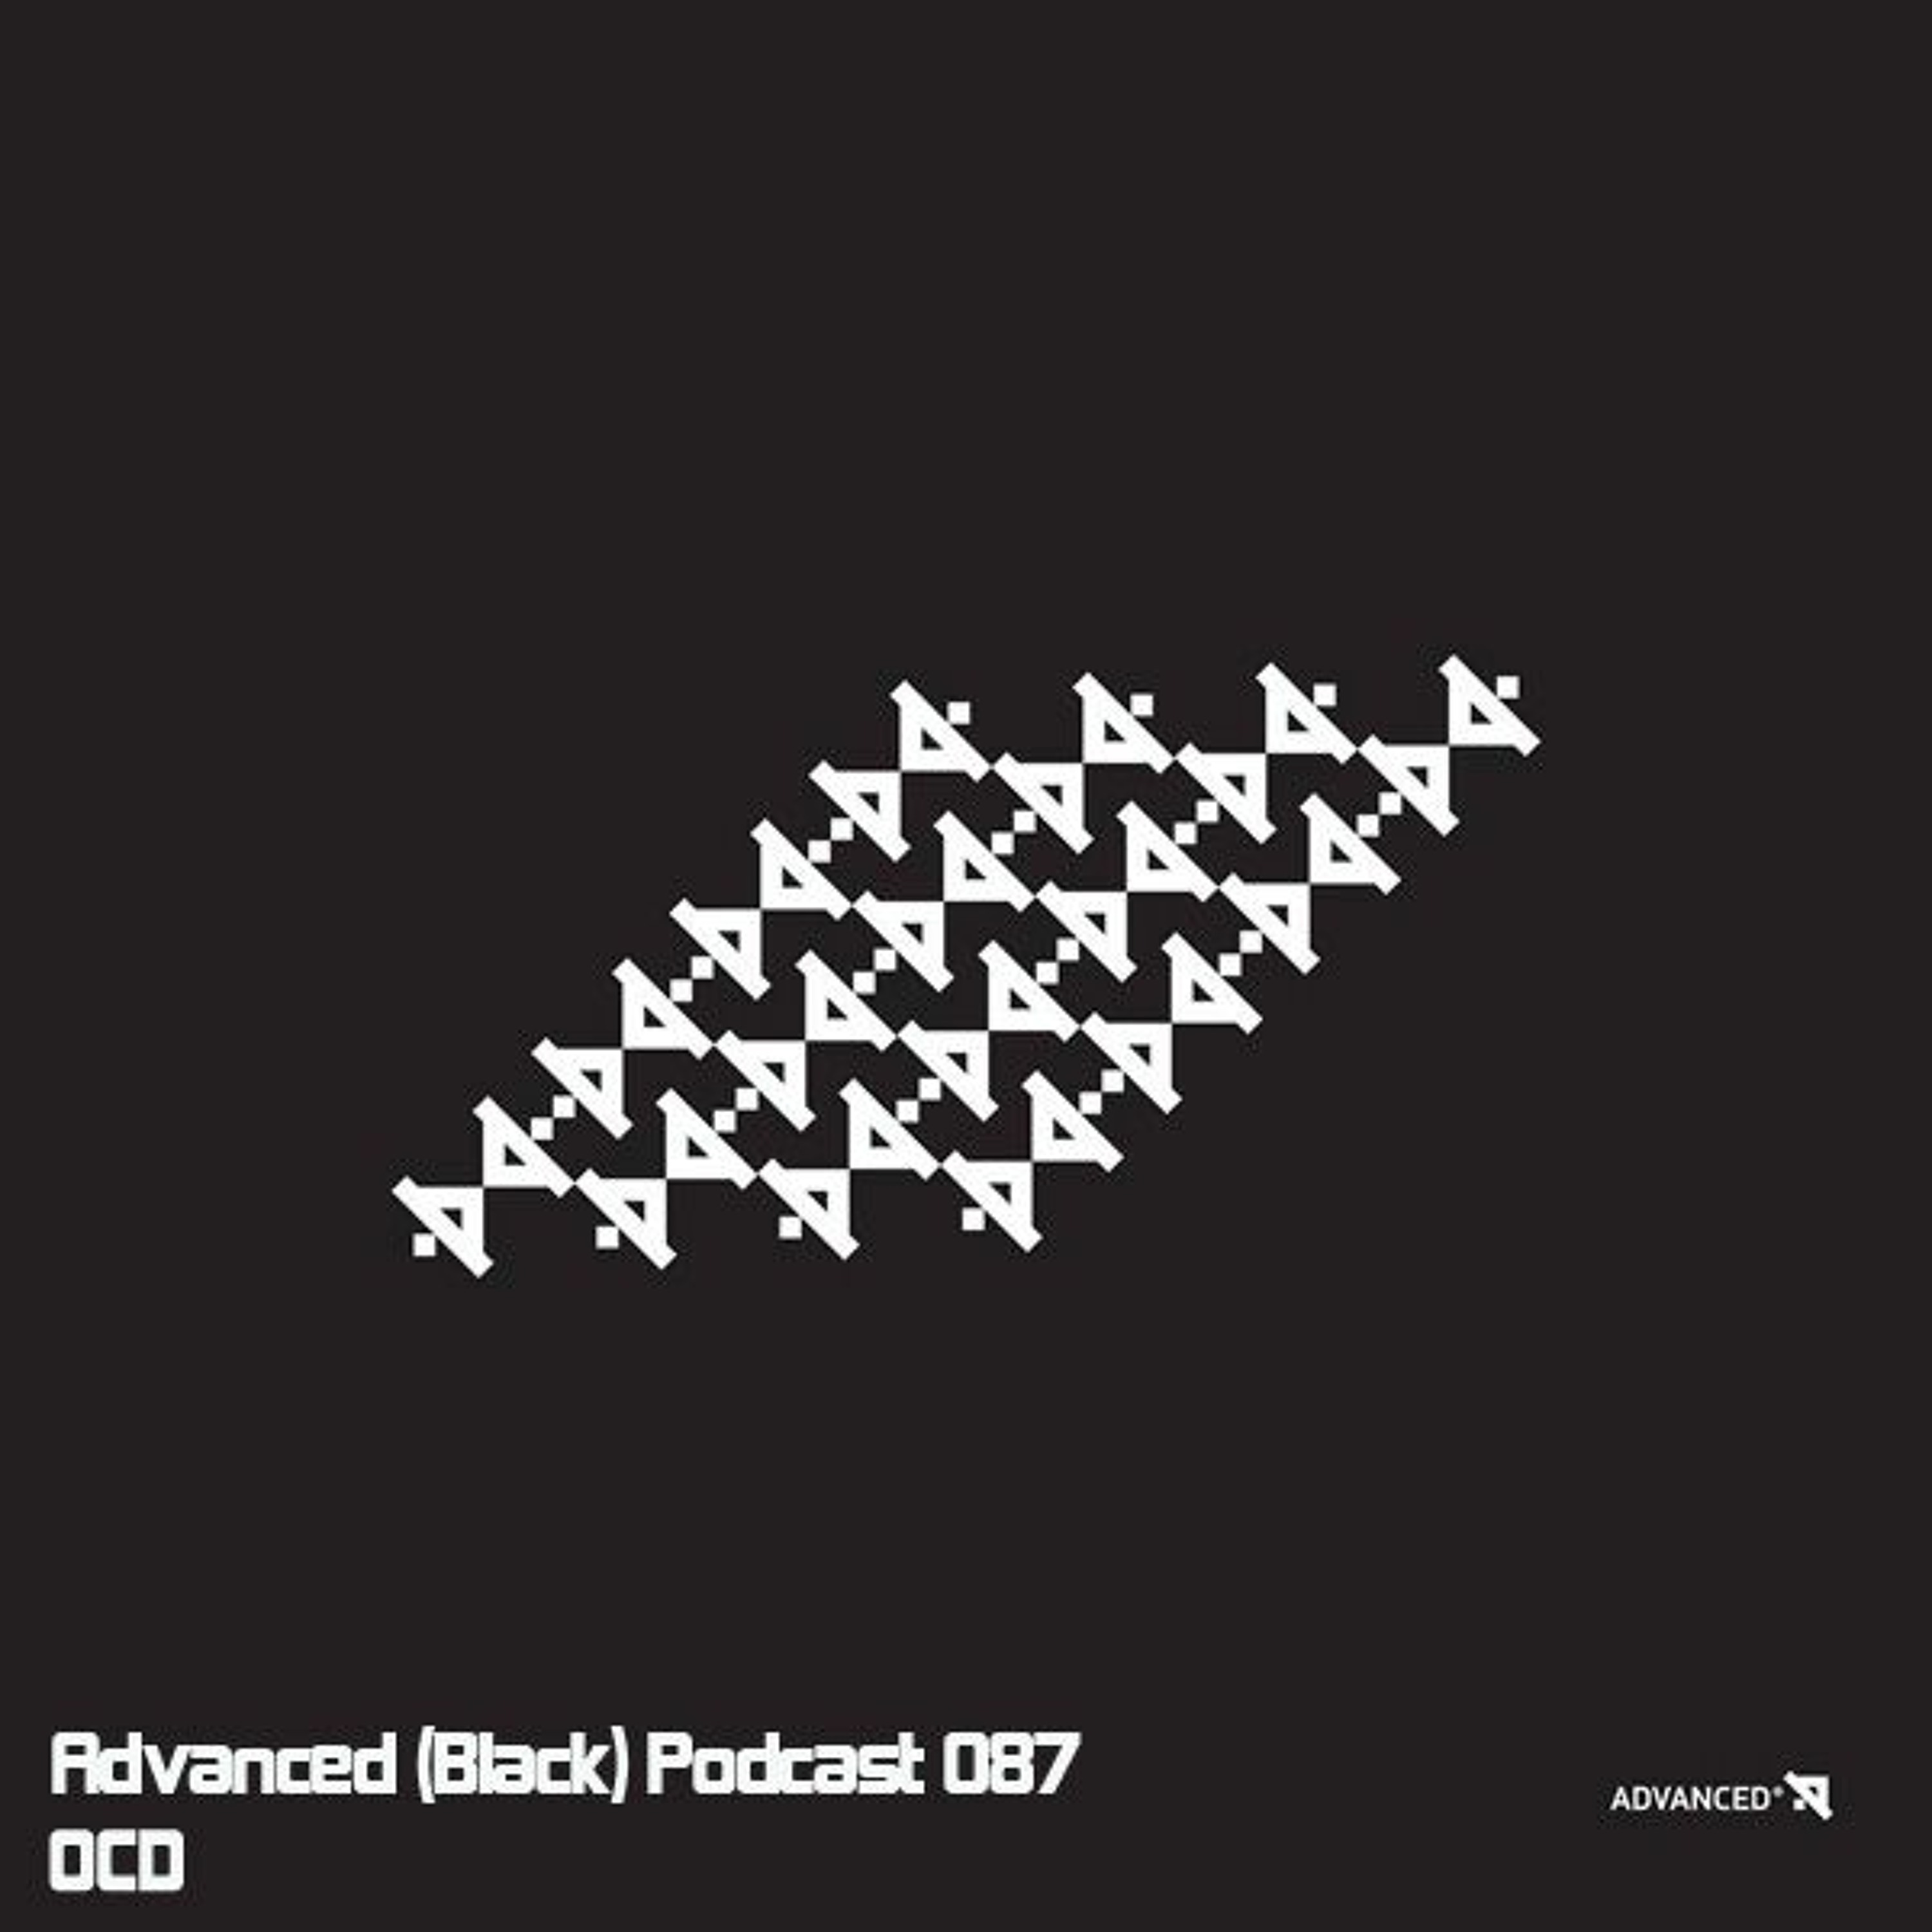 Advanced (Black) Podcast 087 with OCD